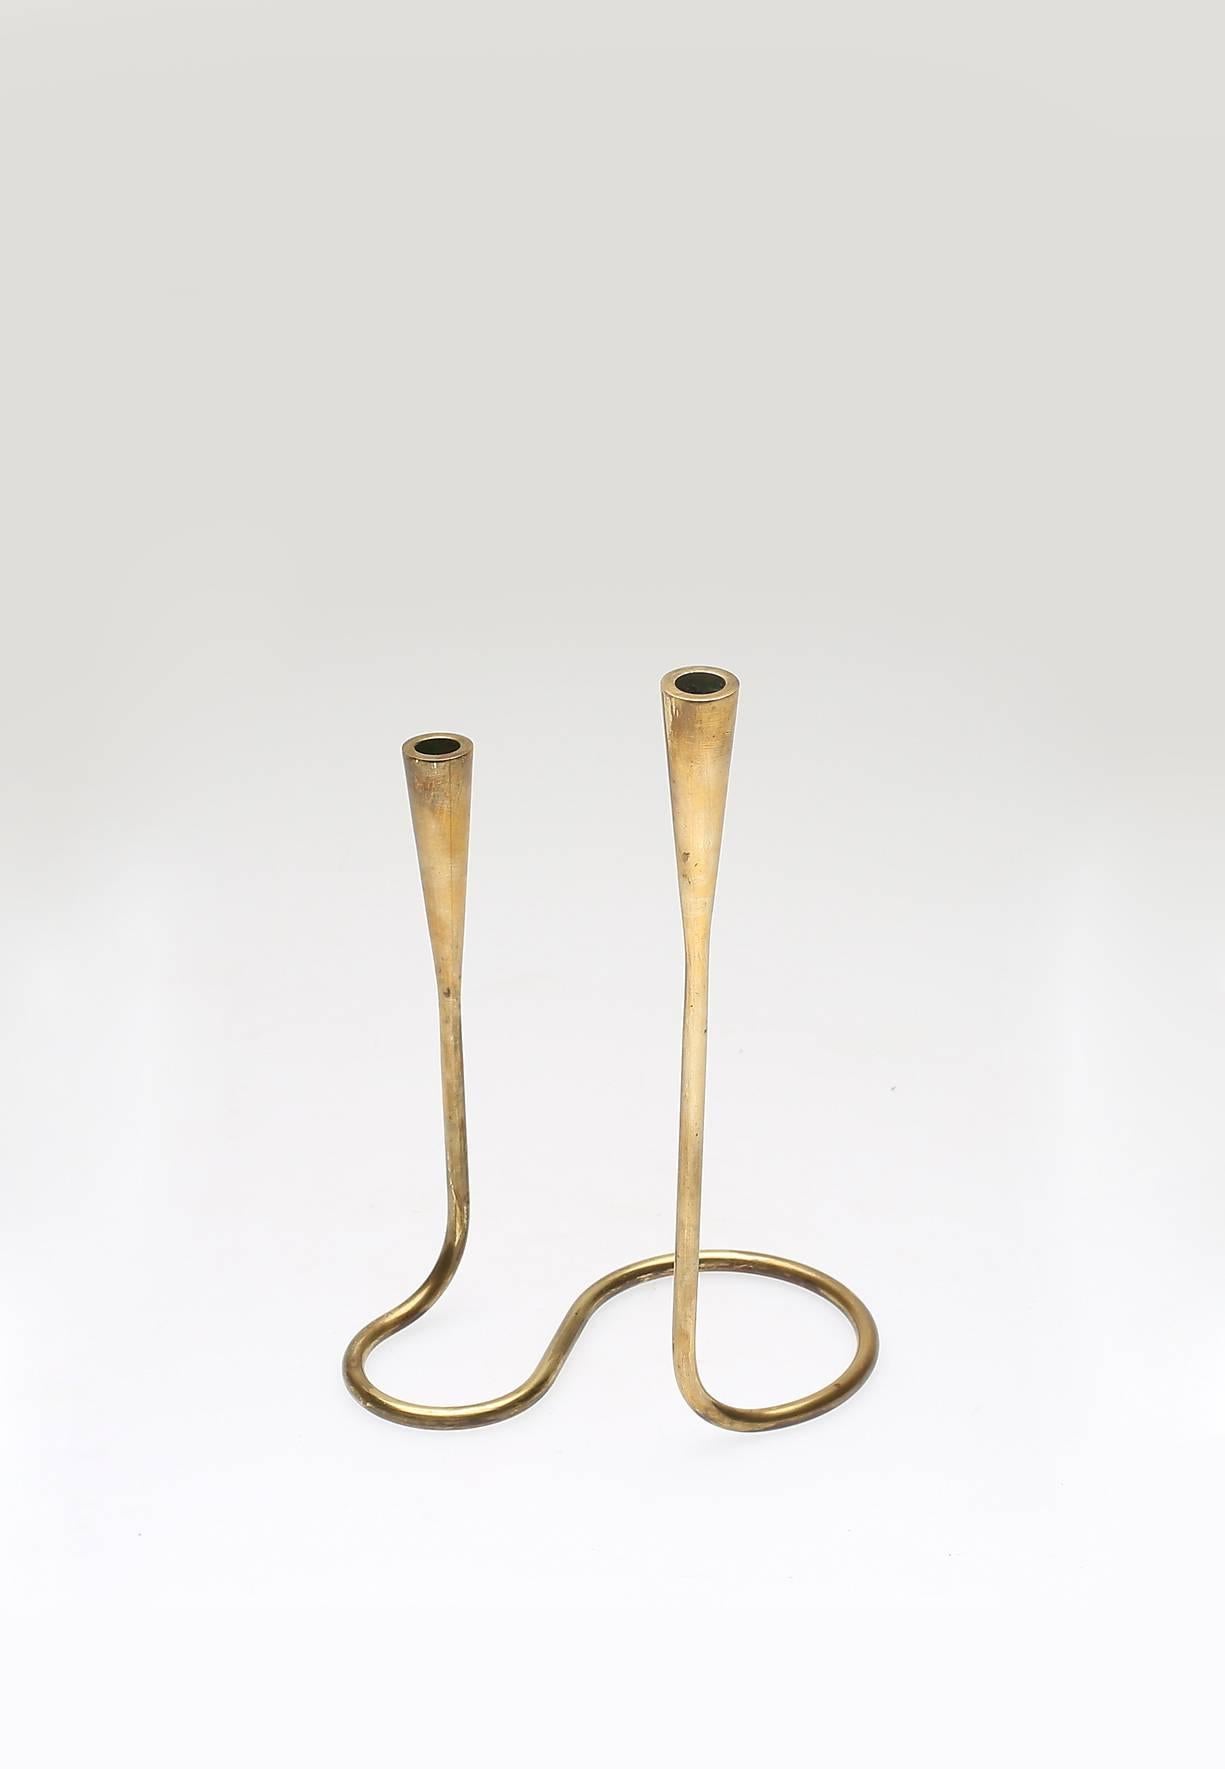 A brass double ended Serpentine candlestick by Illums Bolighus, Denmark, circa 1950s.  Ships worldwide.